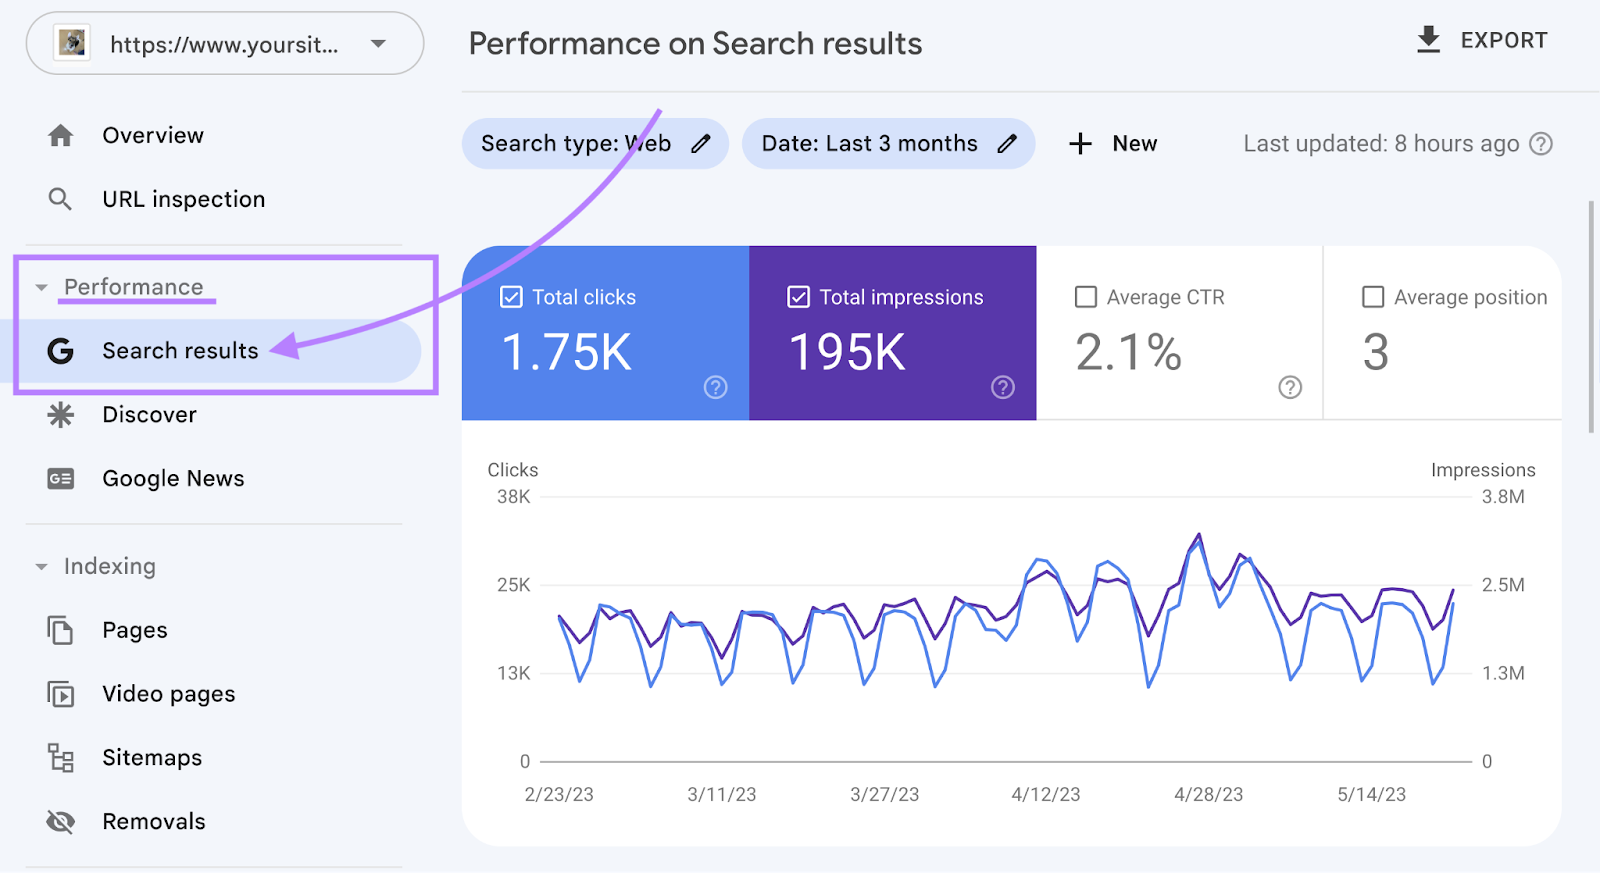 “Search results” report under “Performance”